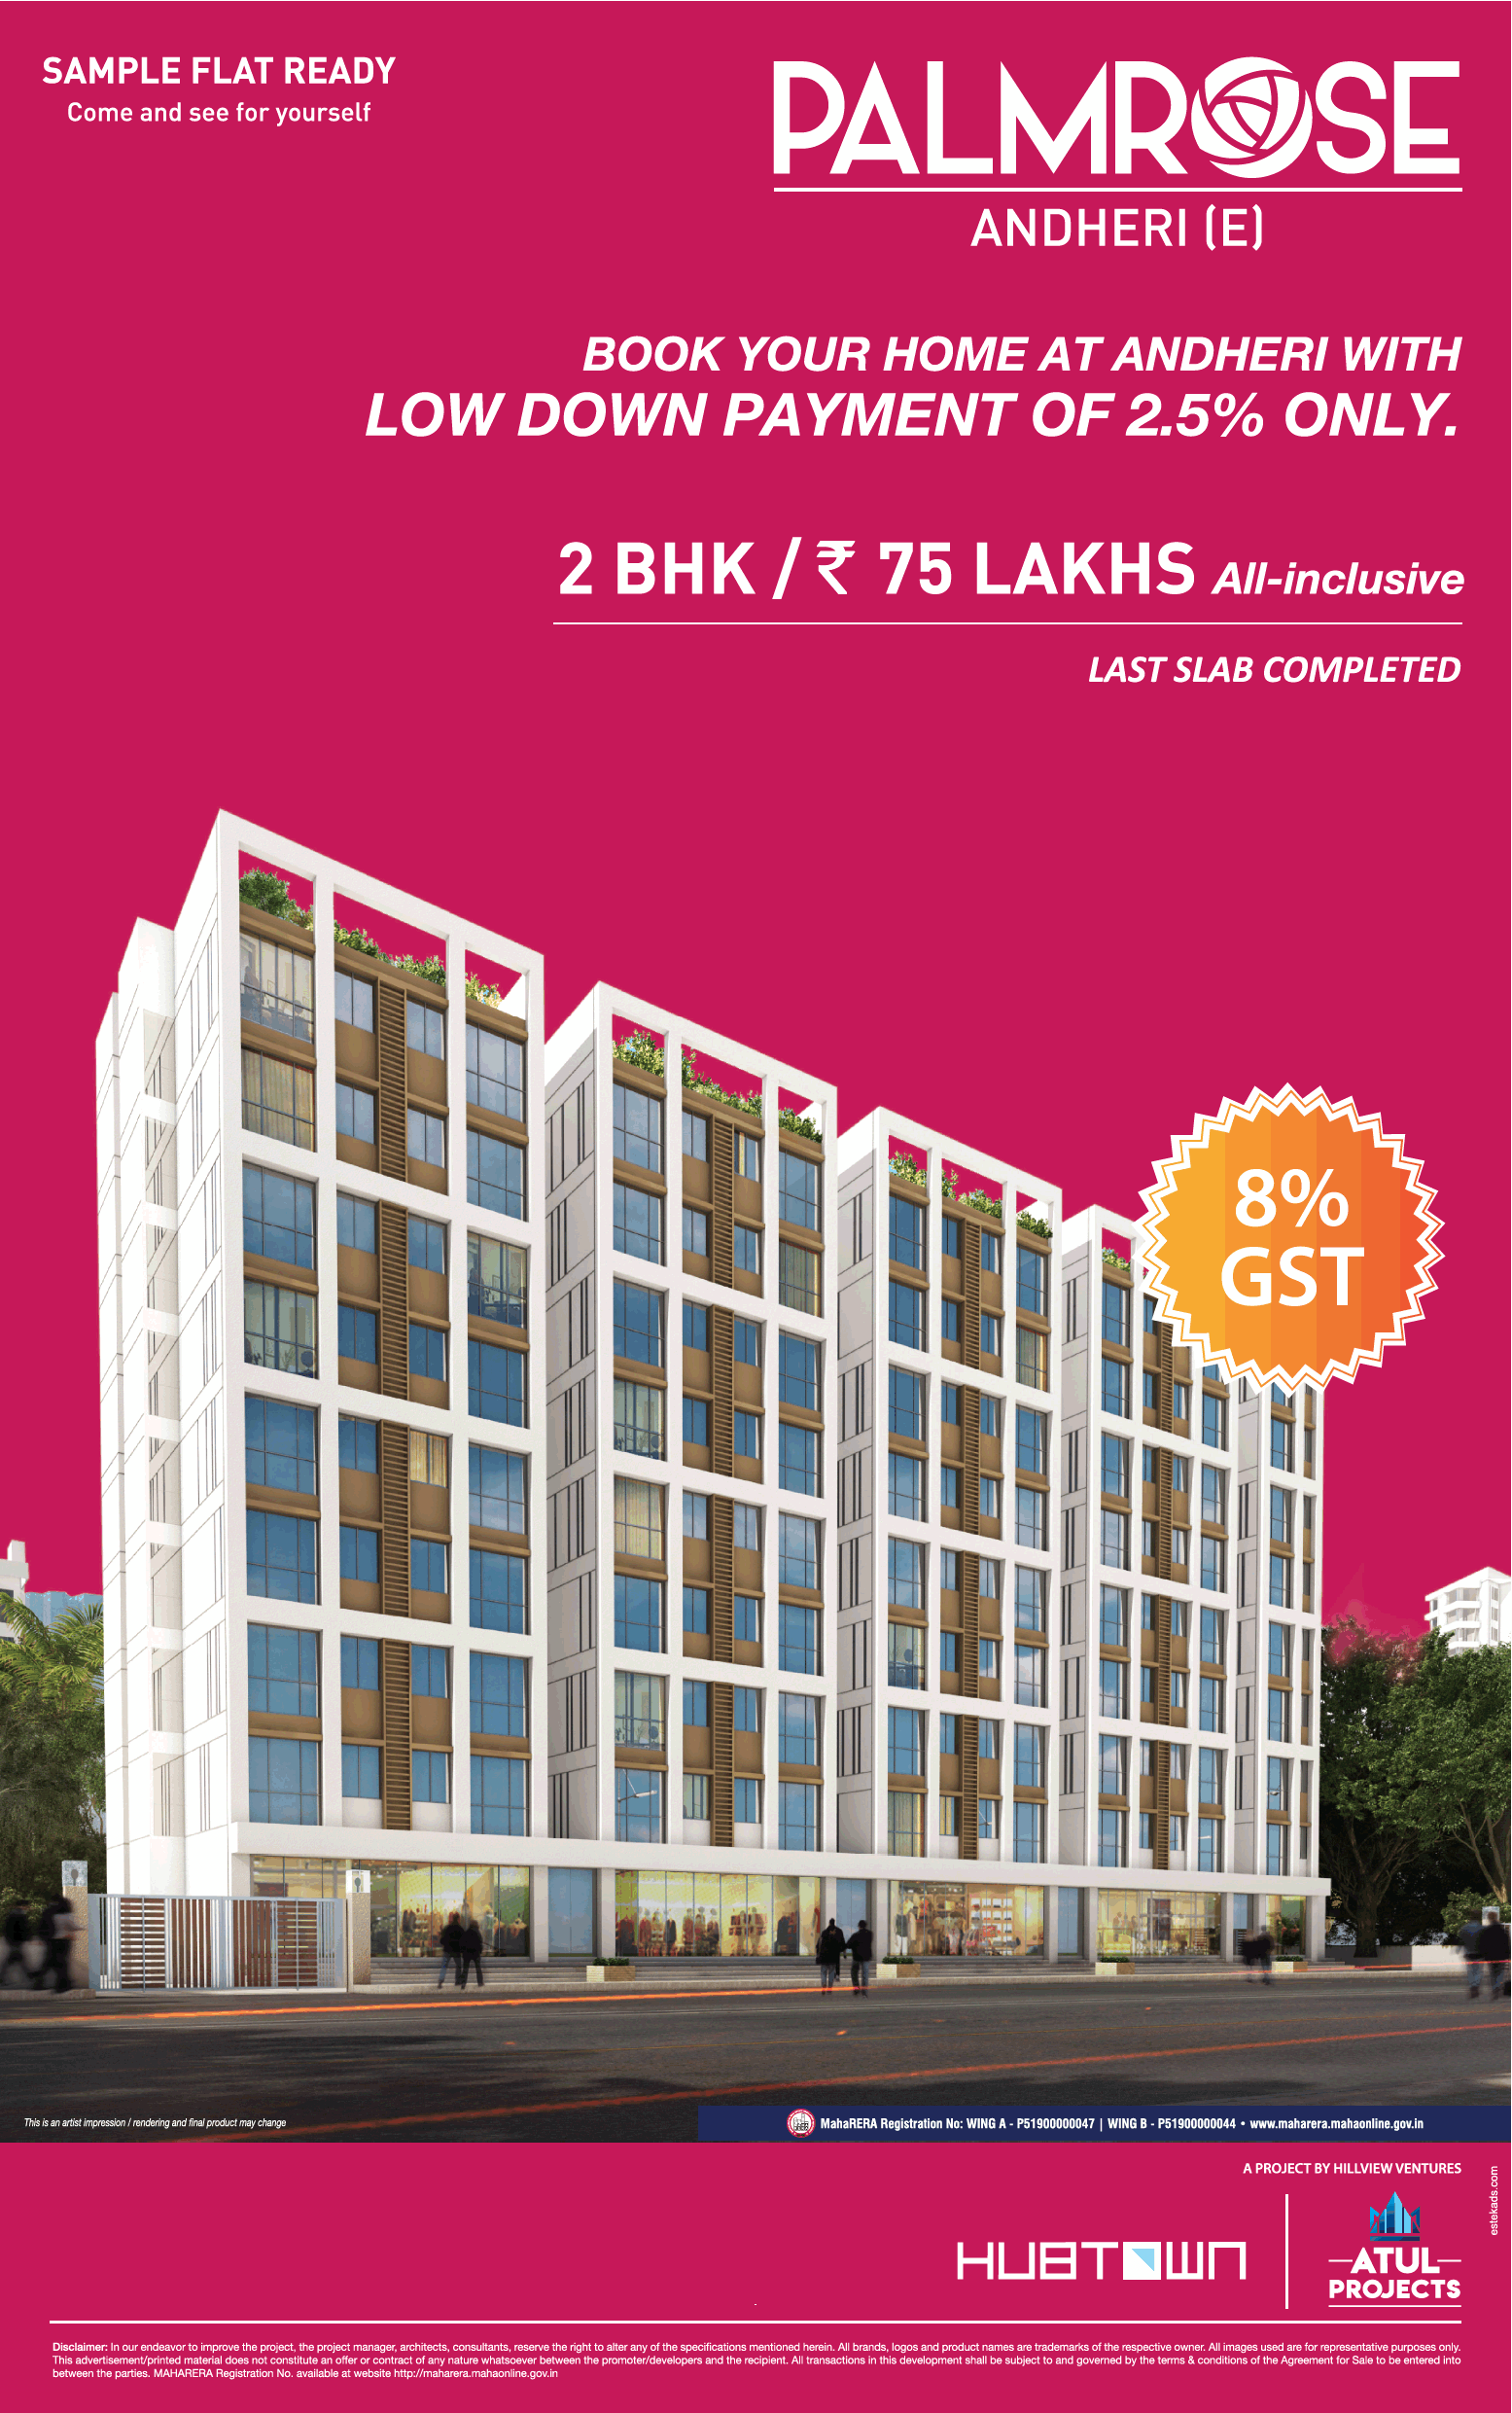 Book 2 bhk with low down payment of 2.5% only at Hubtown Palmrose in Mumbai Update